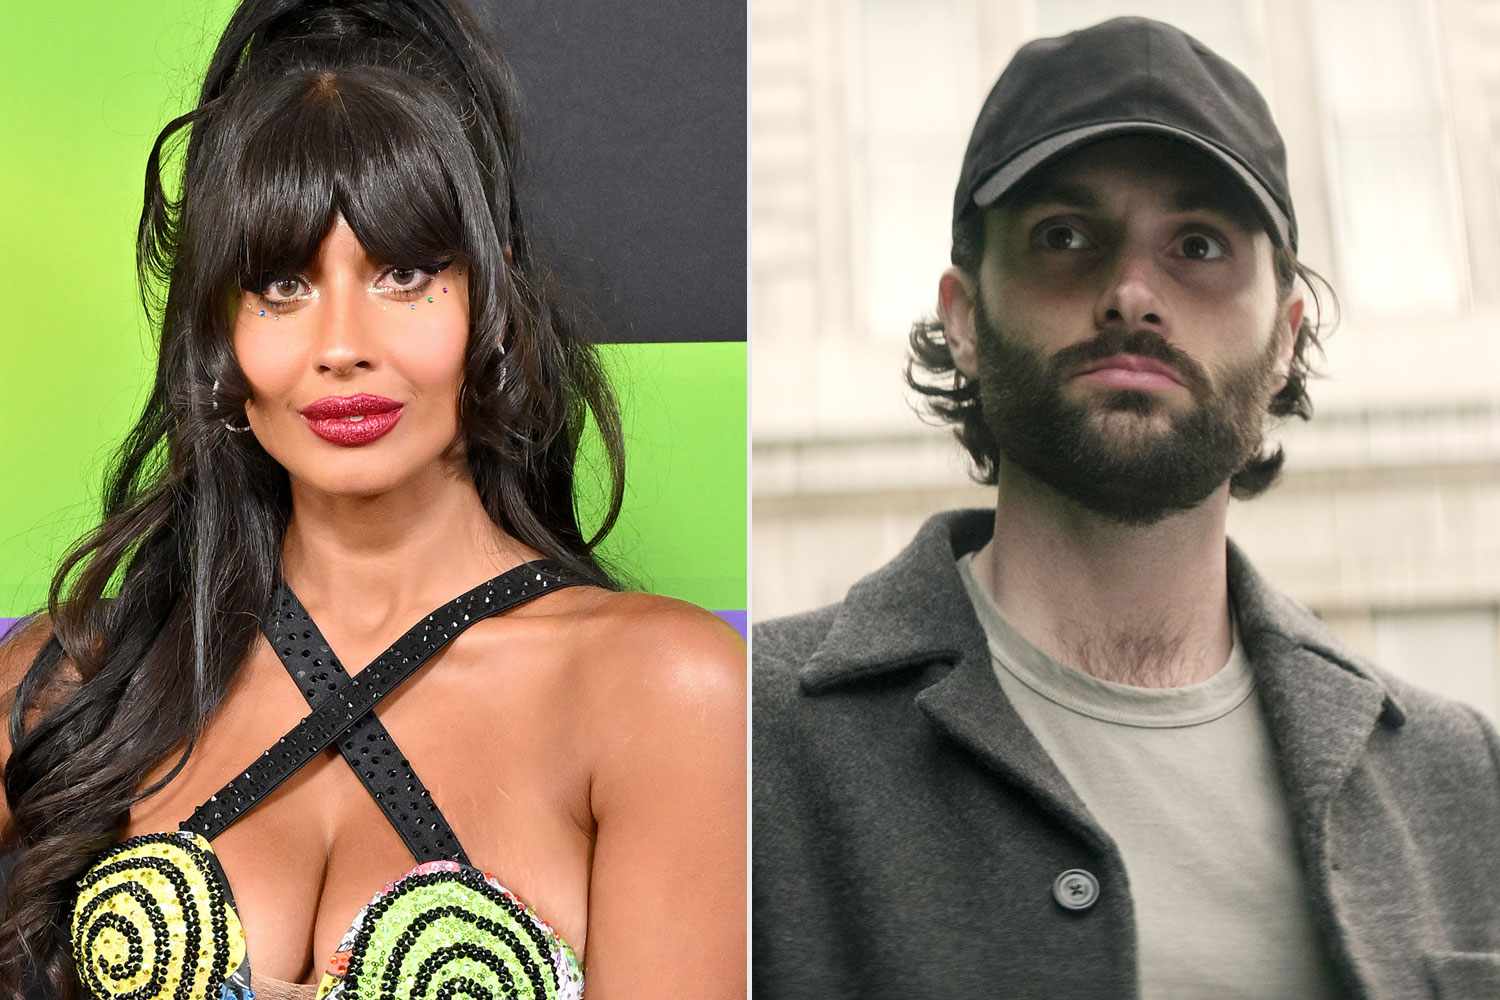 bryan lees recommends jameela jamil nudography pic